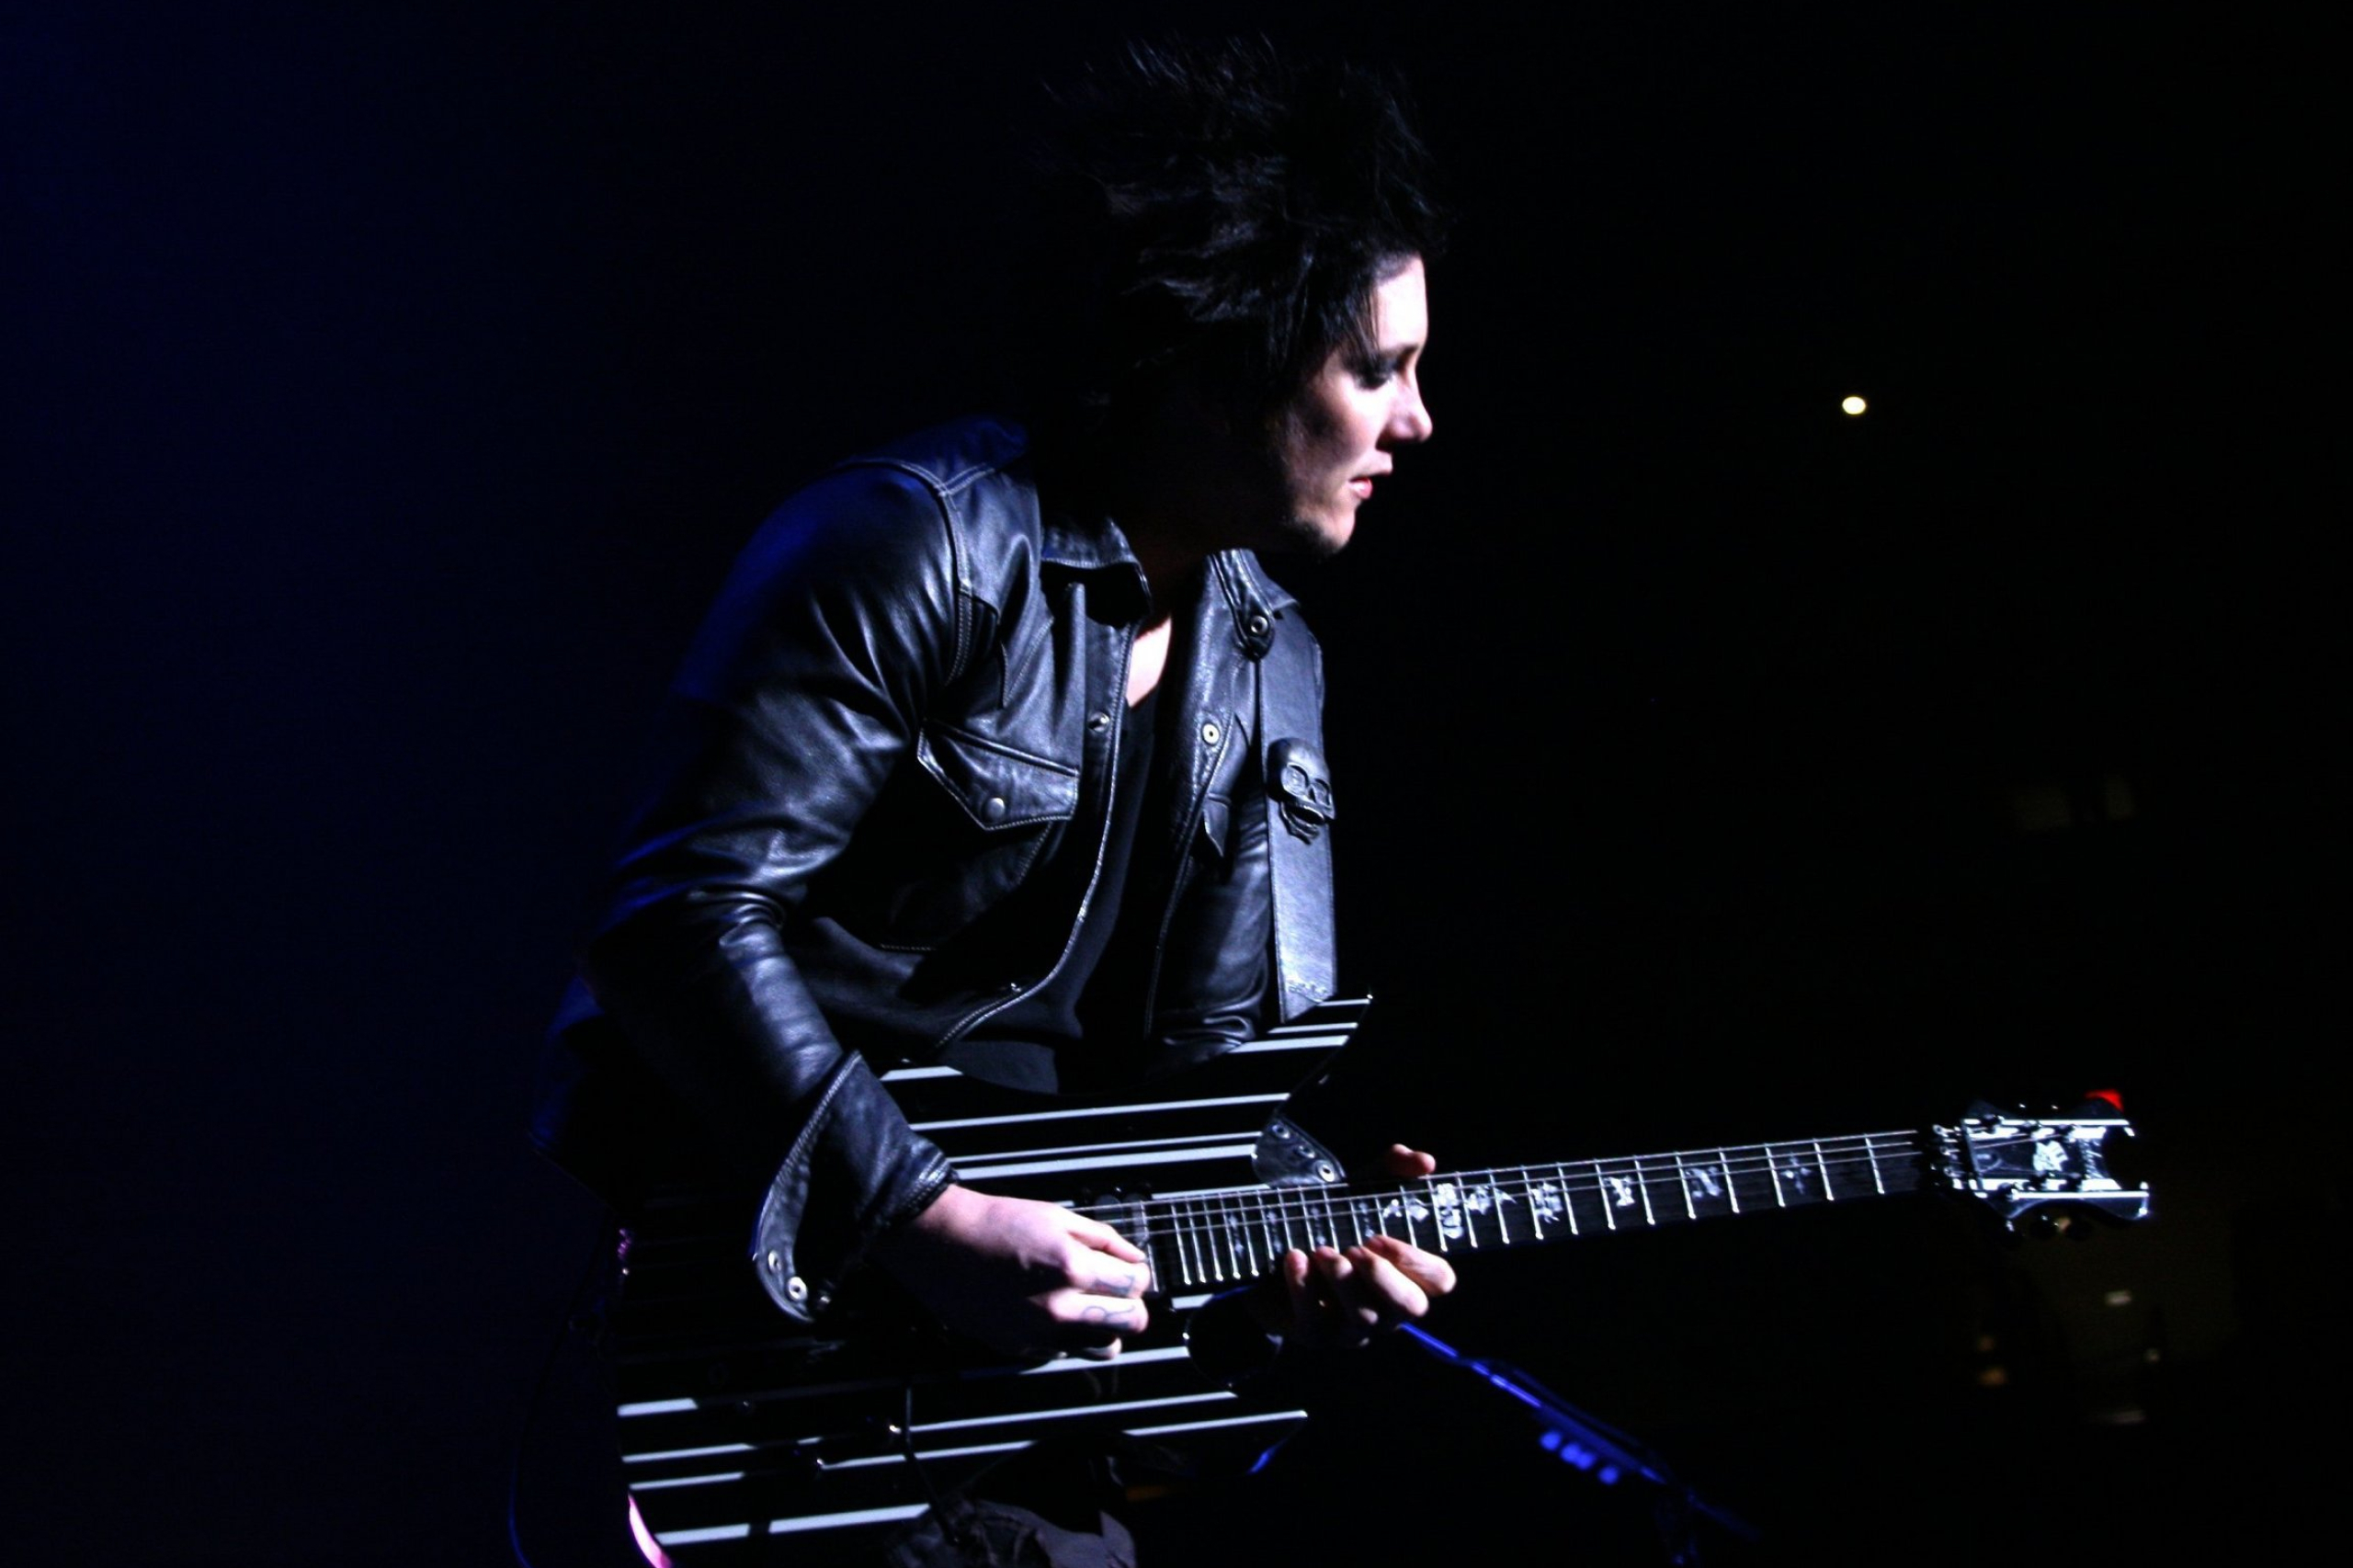 Synyster wallpapers and backgrounds k hd dual screen